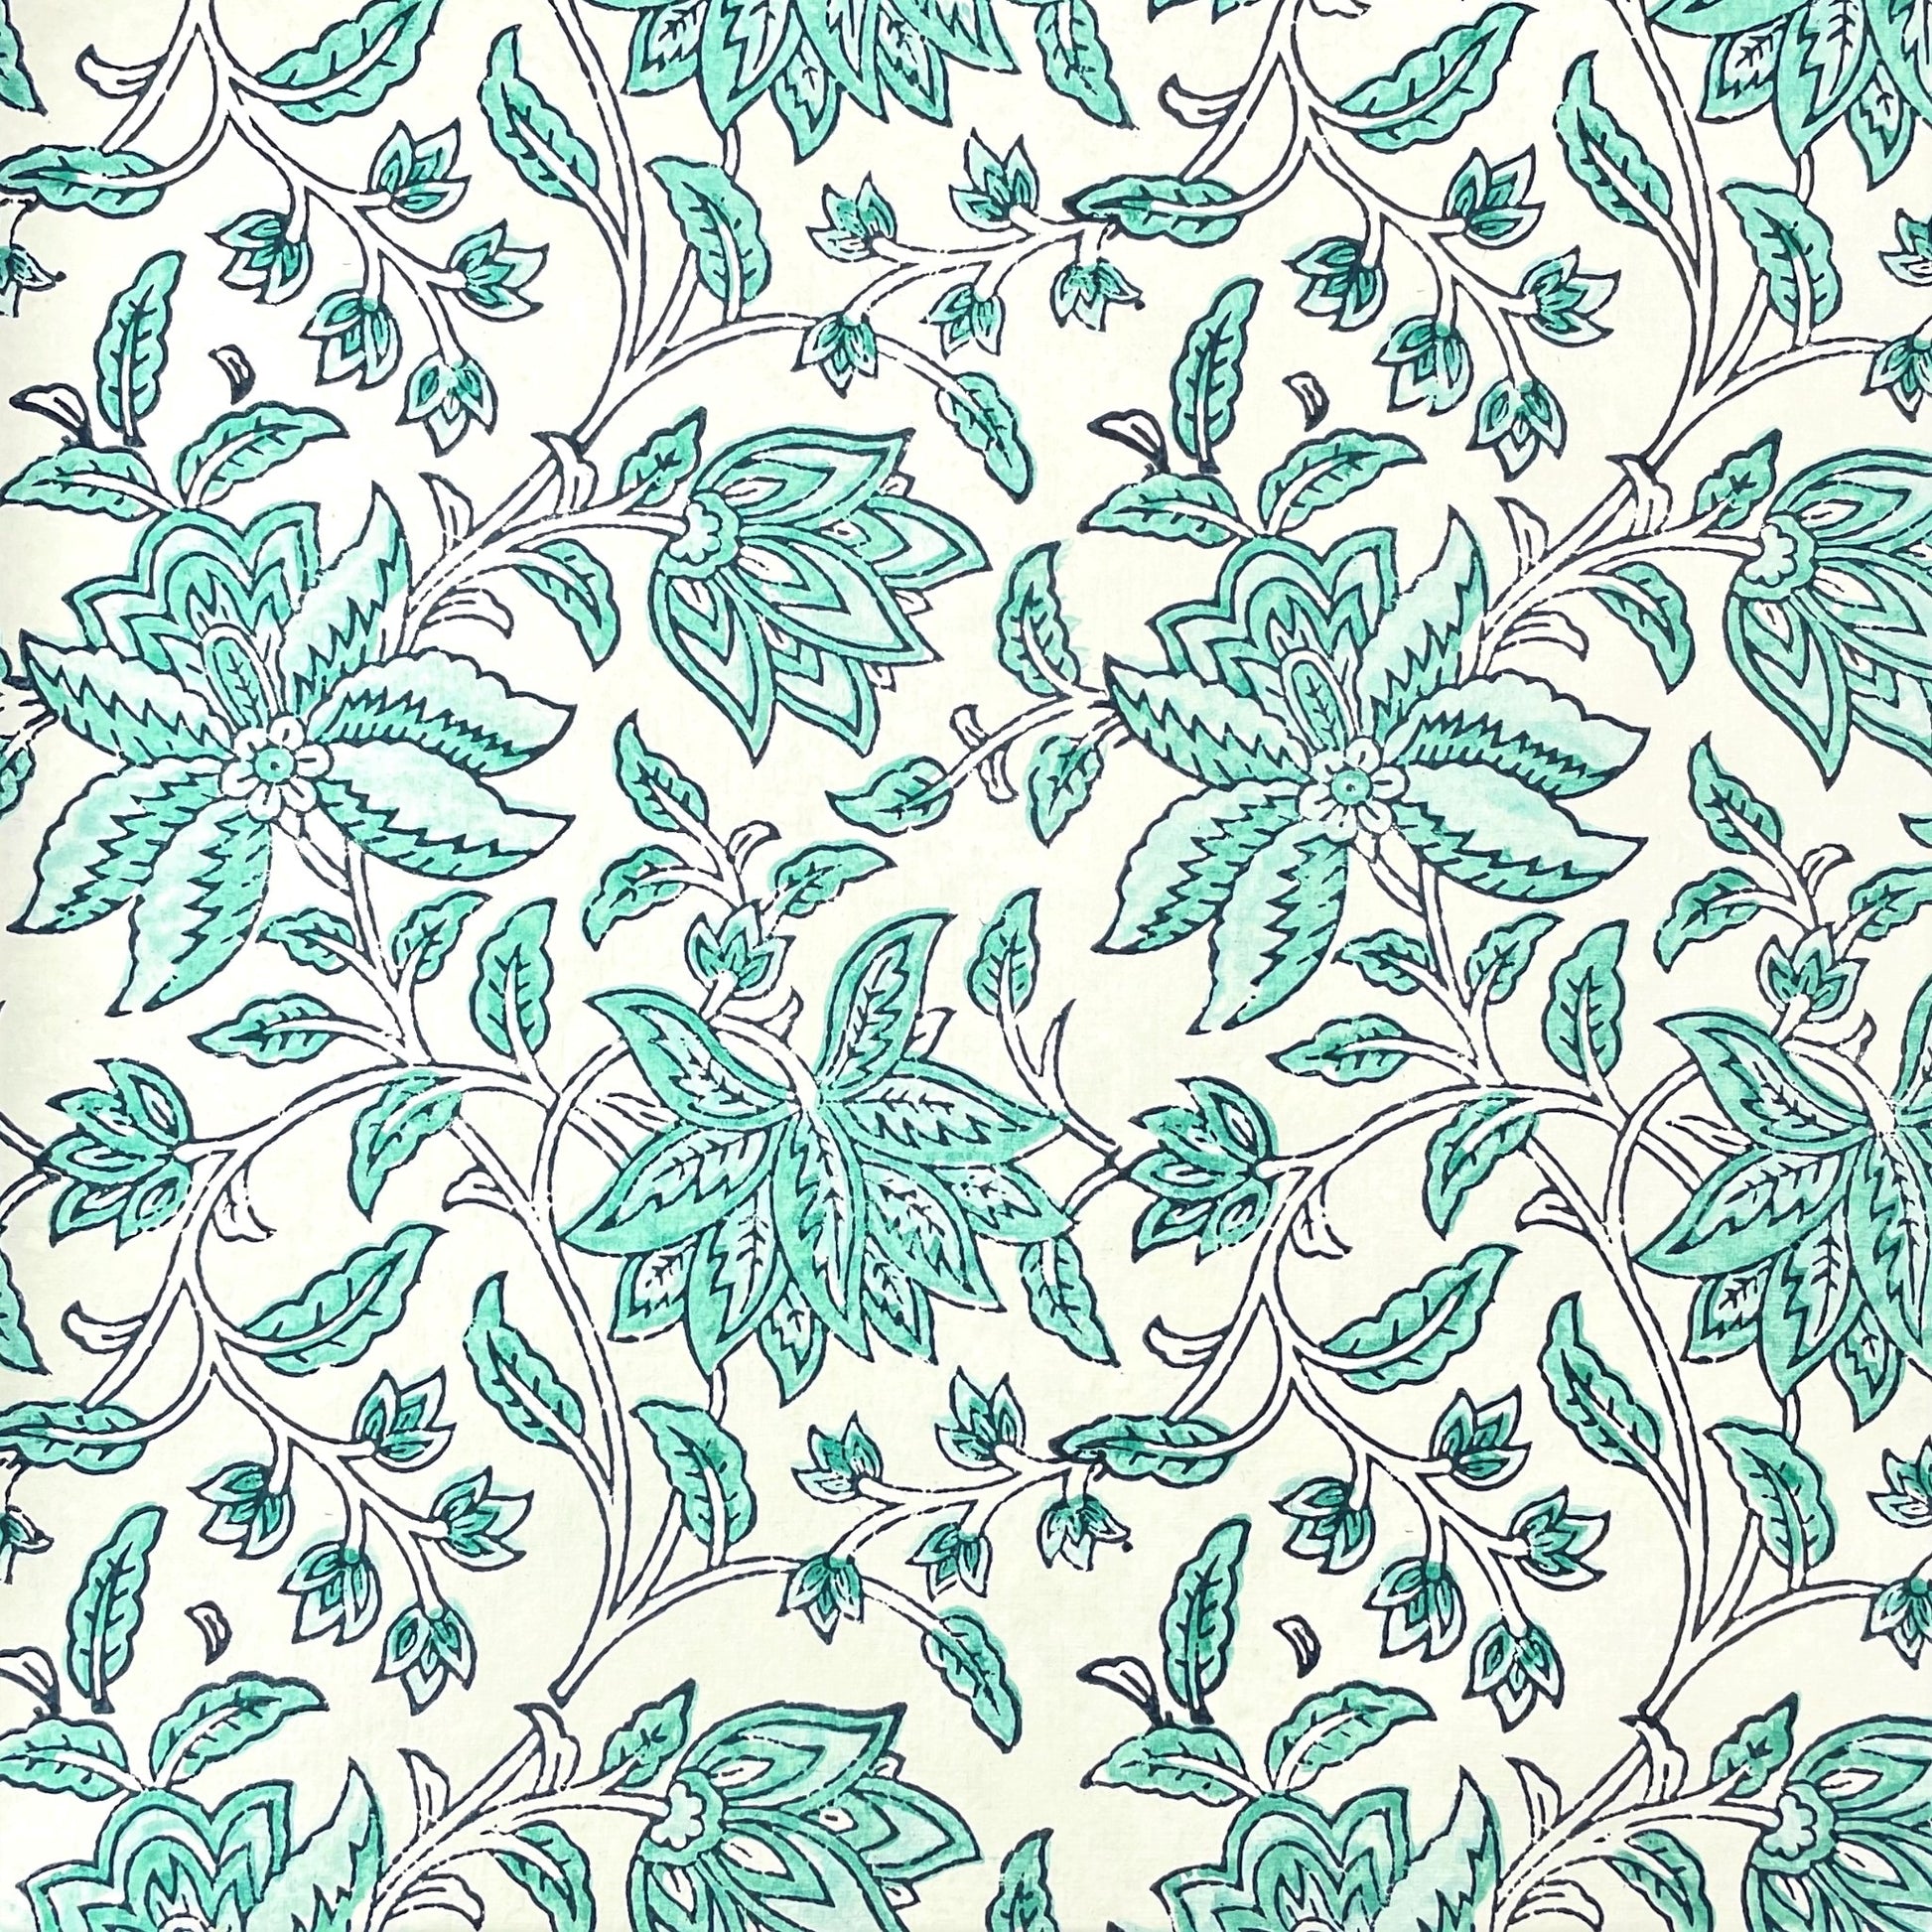 wrapping paper with repeat botanical floral pattern in light aqua by Paper Mirchi